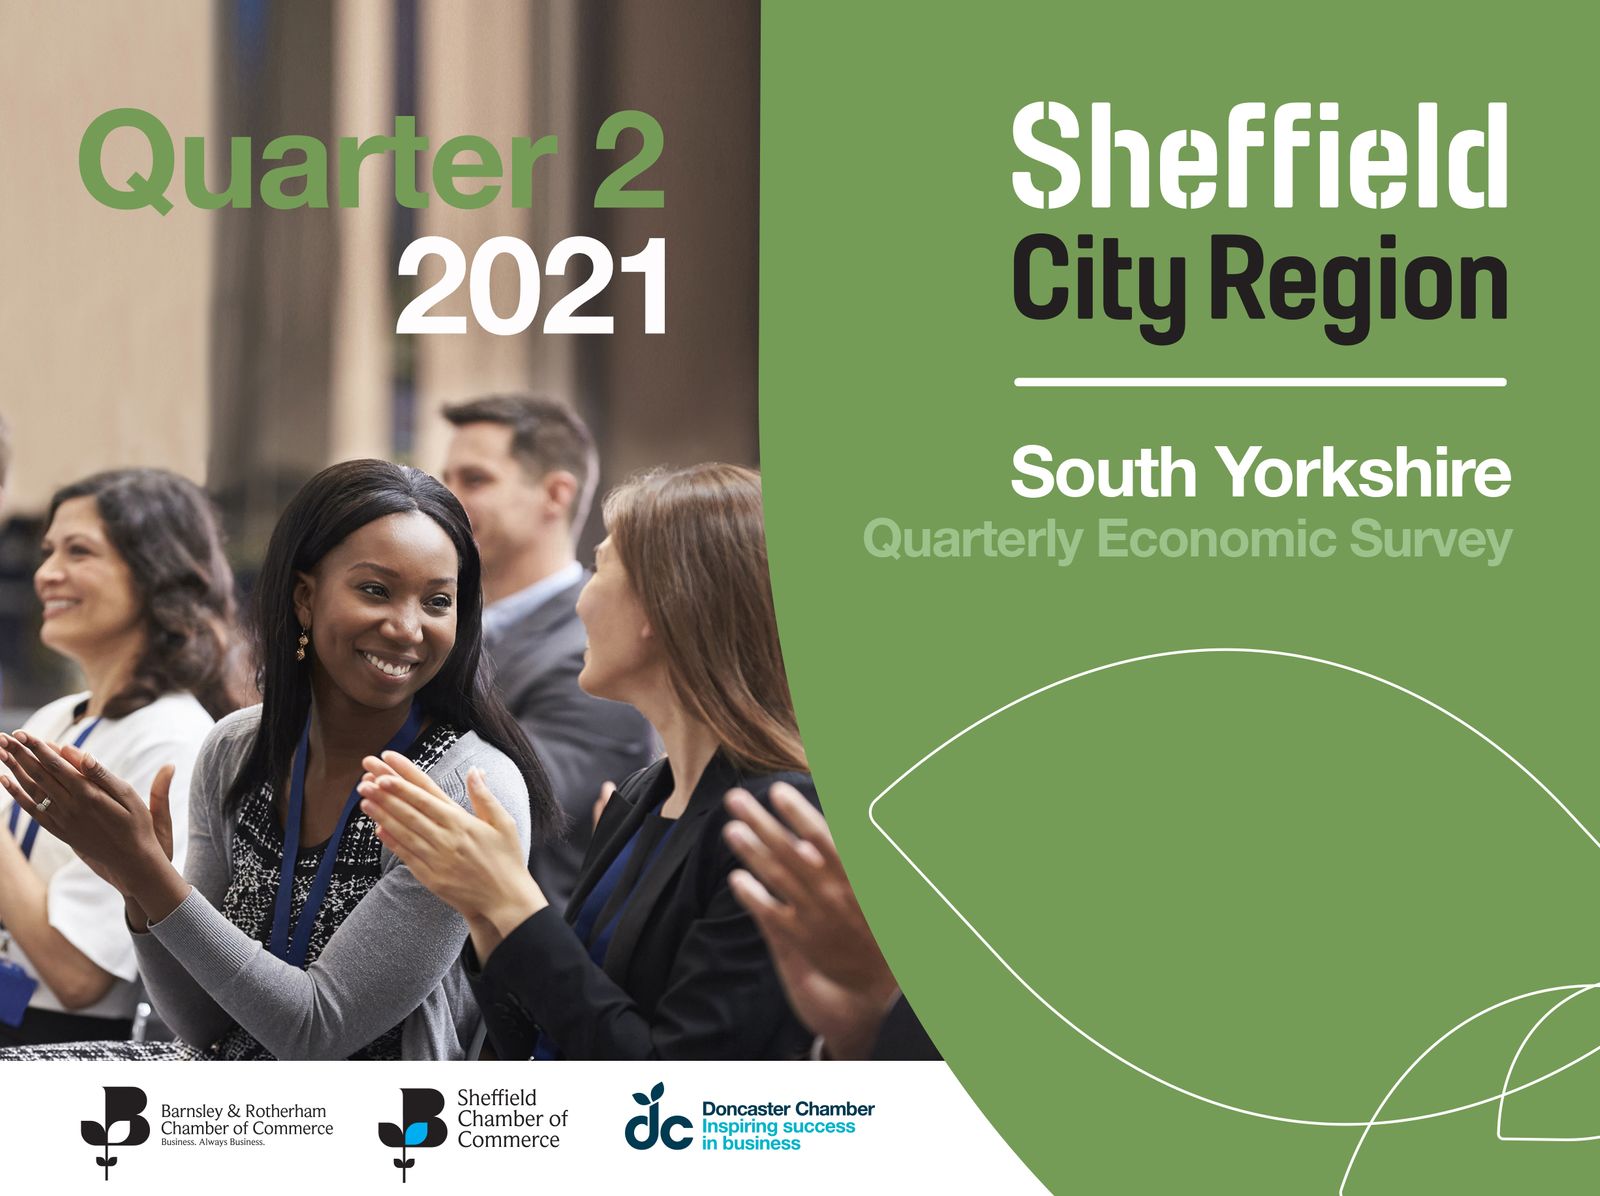 South Yorkshire Chambers event to offer FREE advice on managing cashflow as their landmark economic survey records fast improvement in the Region’s economy alongside new risks